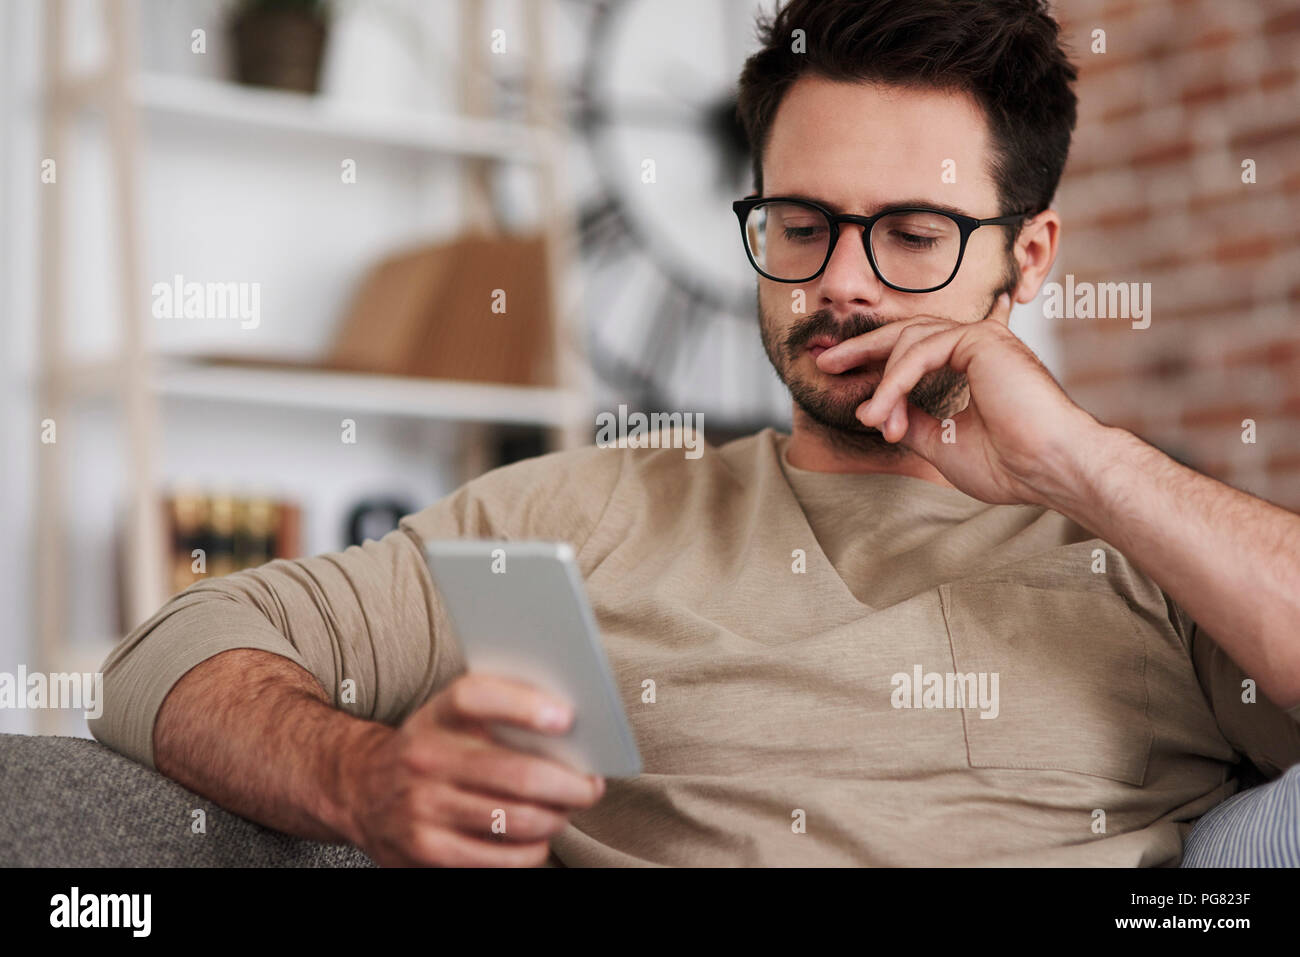 Portrait of man sitting on couch at home looking at smartphone Stock Photo